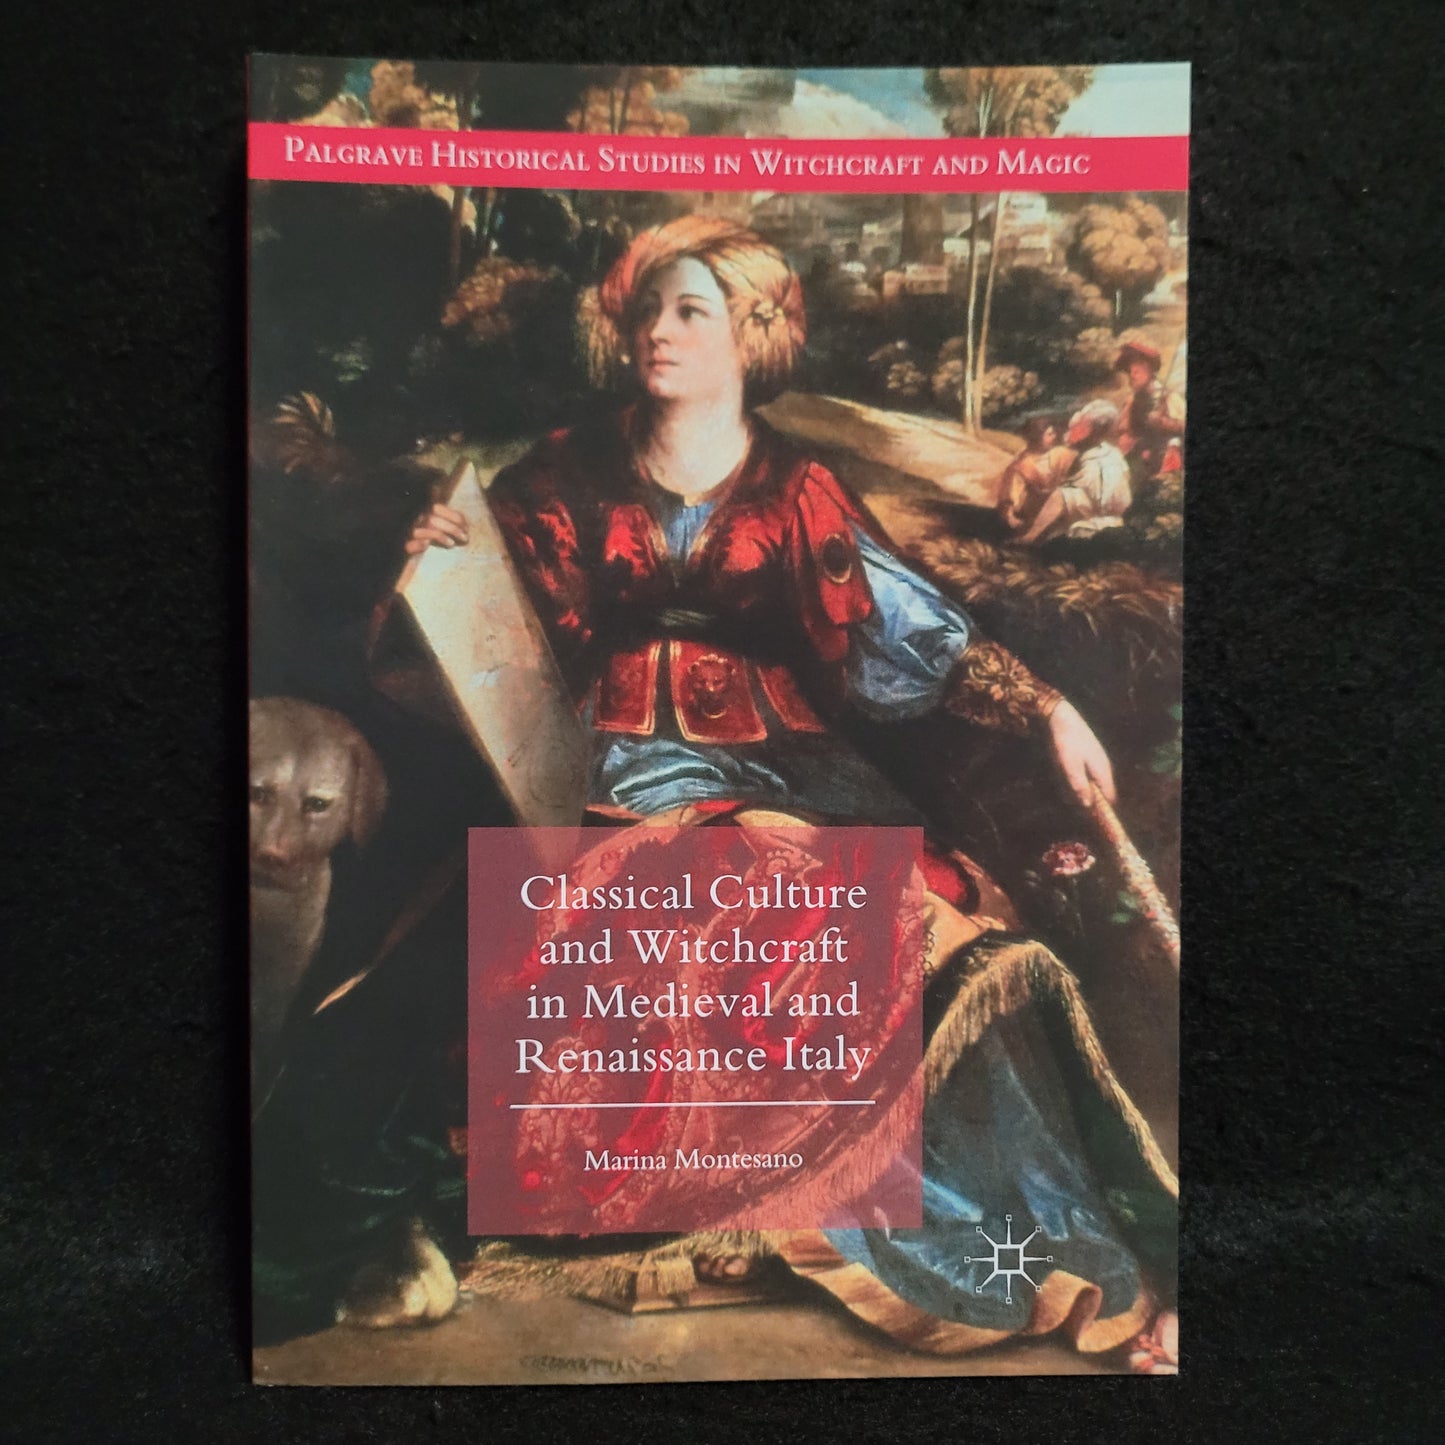 Classical Culture and Witchcraft in Medieval and Renaissance Italy, Palgrave Historical Studies in Witchcraft and Magic by Marina Montesano (Palgrave Macmillan, 2018) Paperback Edition